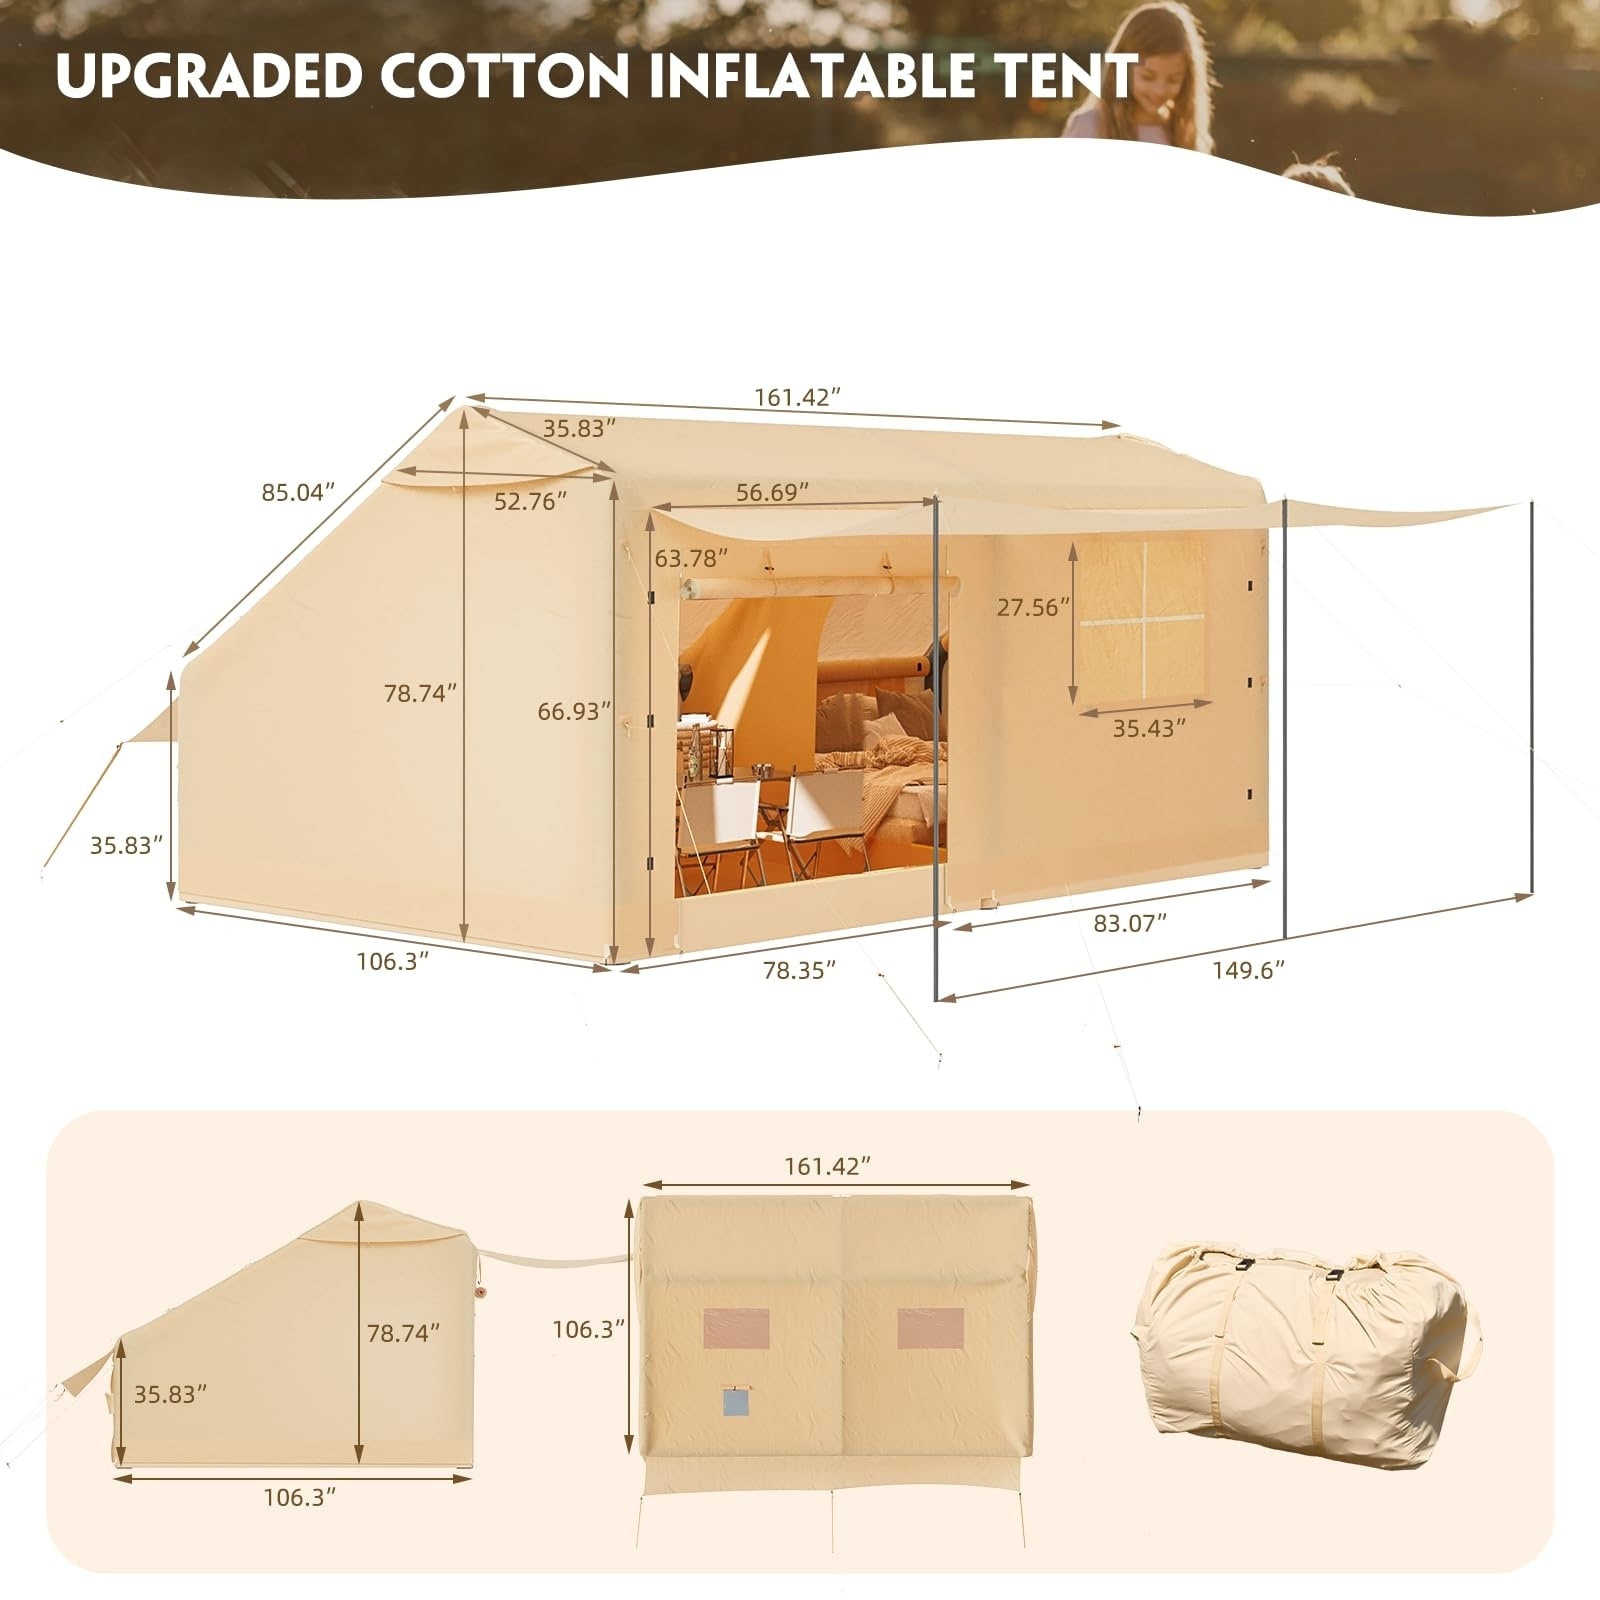 YOLENY Inflatable Camping Tent, Glamping Tents 4 Season Waterproof  Windproof Cotton Tent with Stove Jack & Mesh Windows & Pump